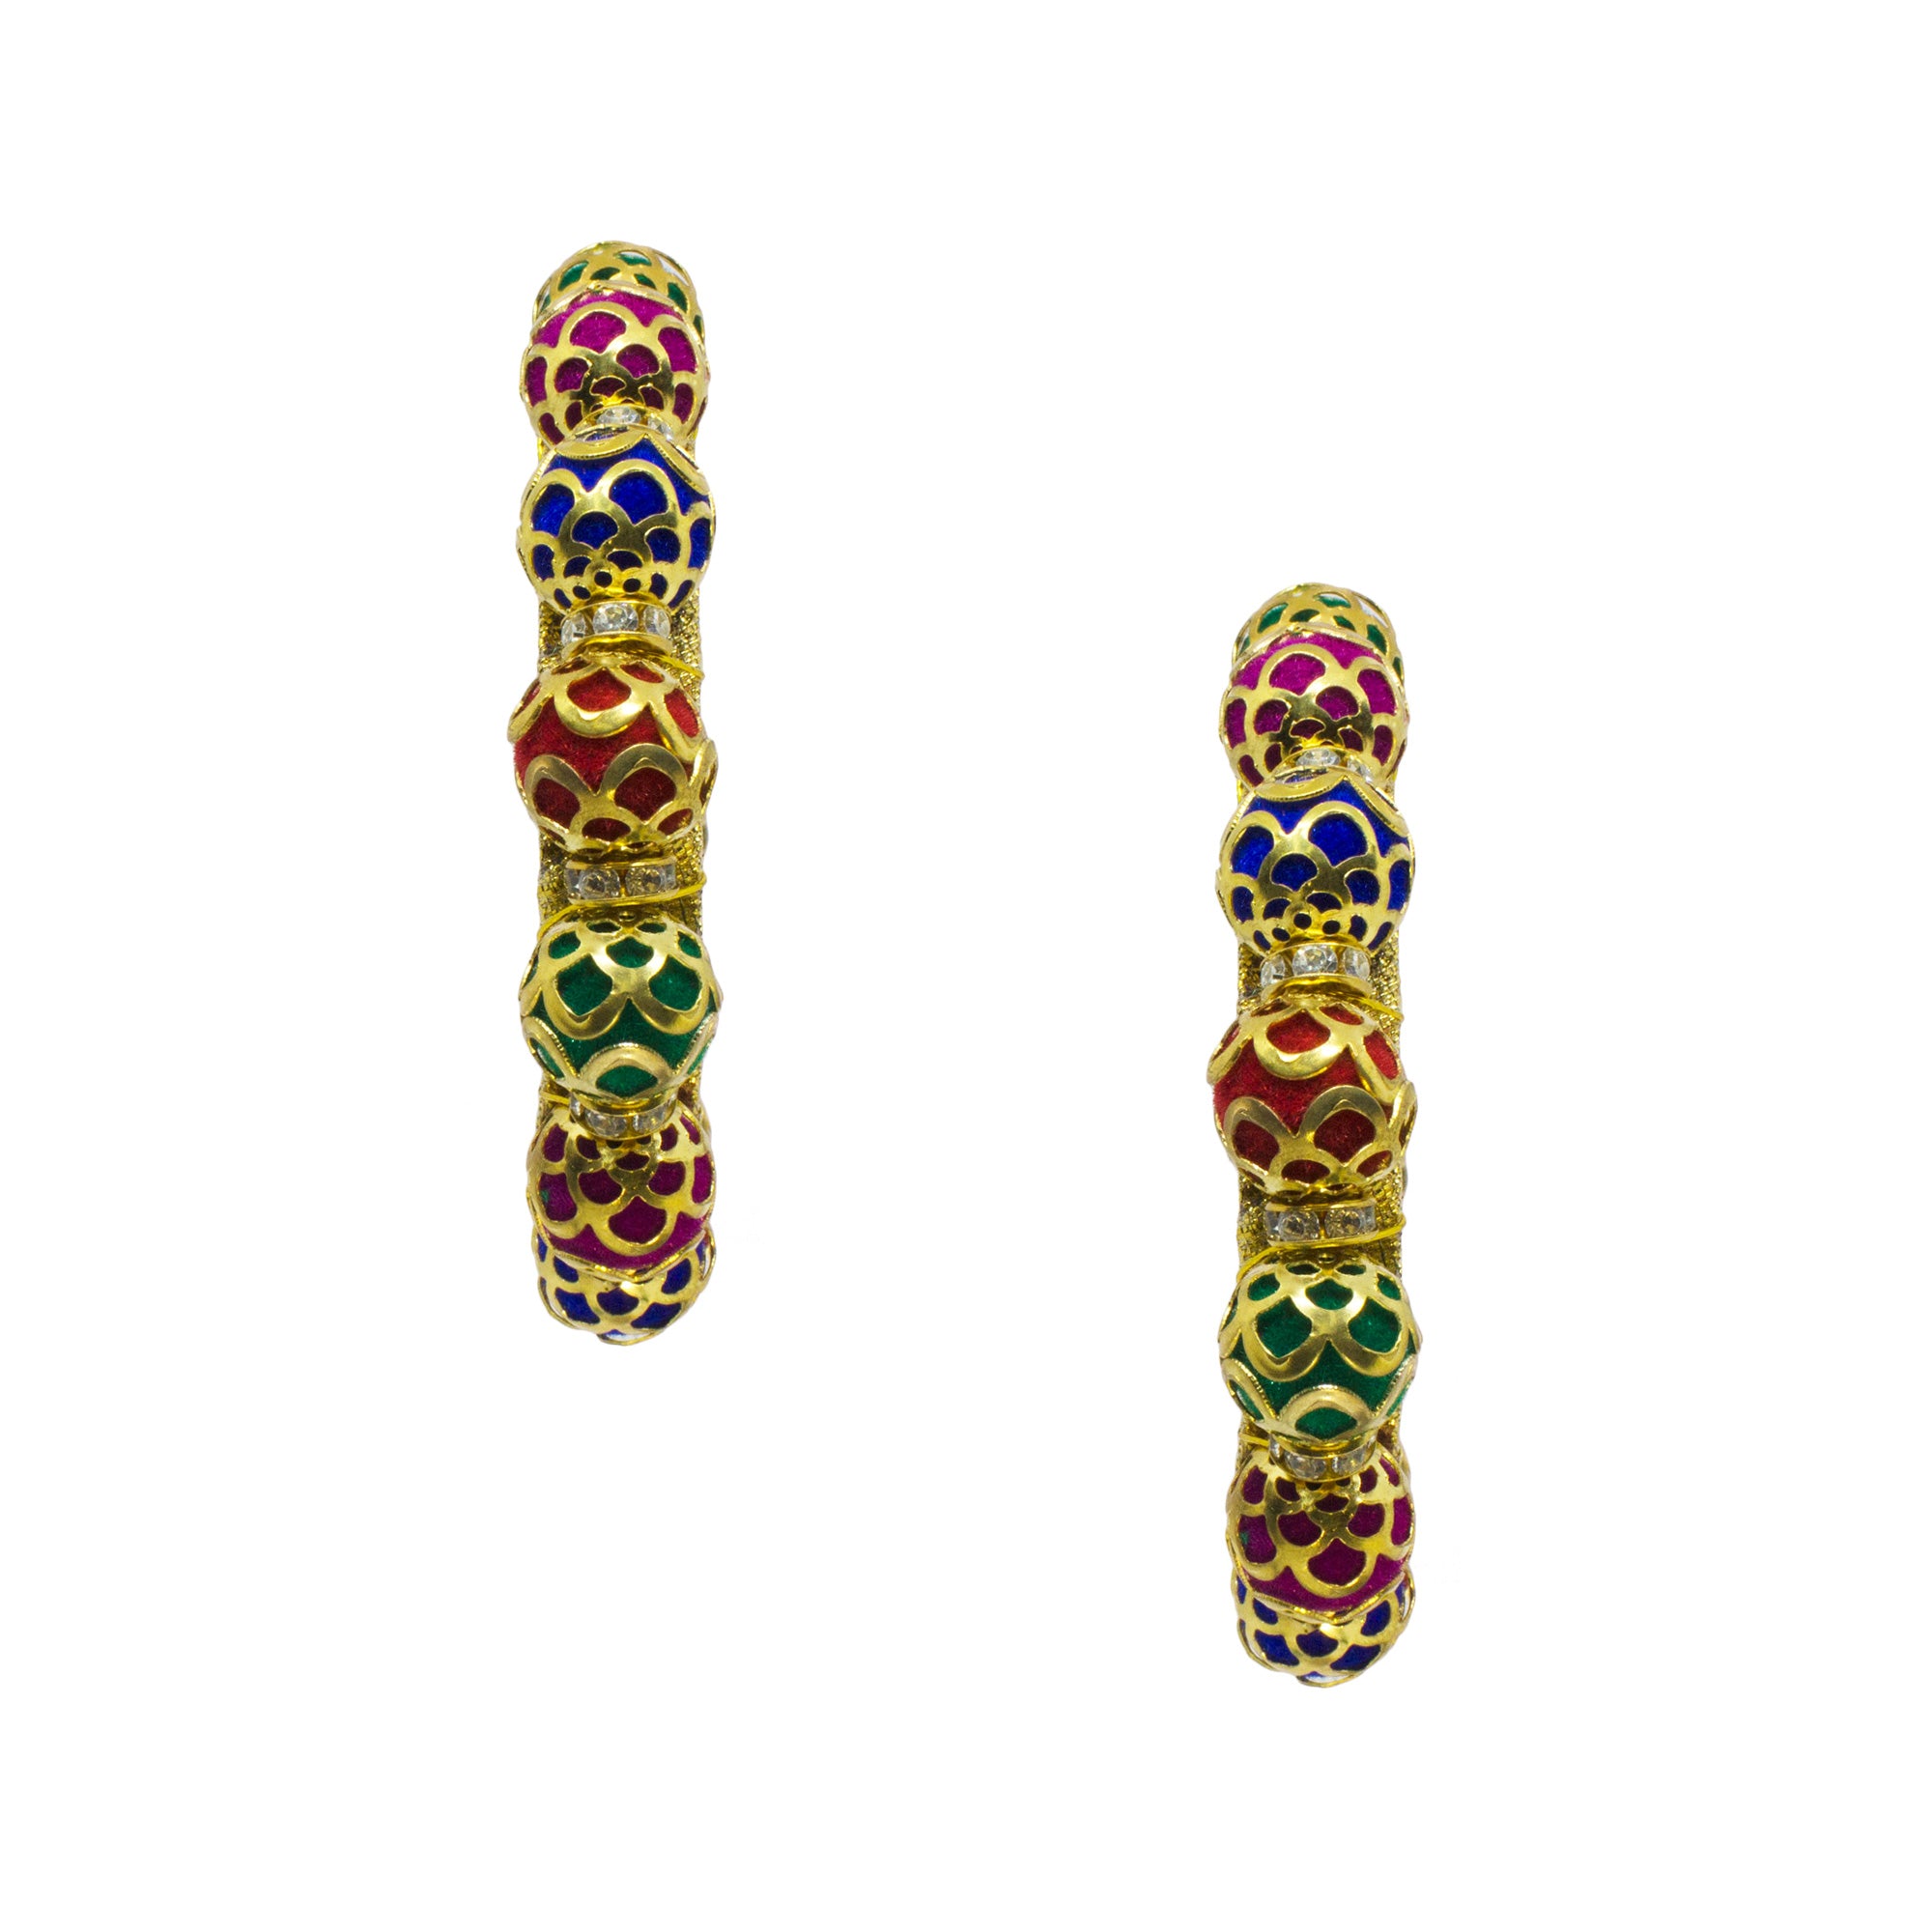 Abhinn Handicrafted Bangle Set Stringed With Multi Colour Cotton Balls For Women 